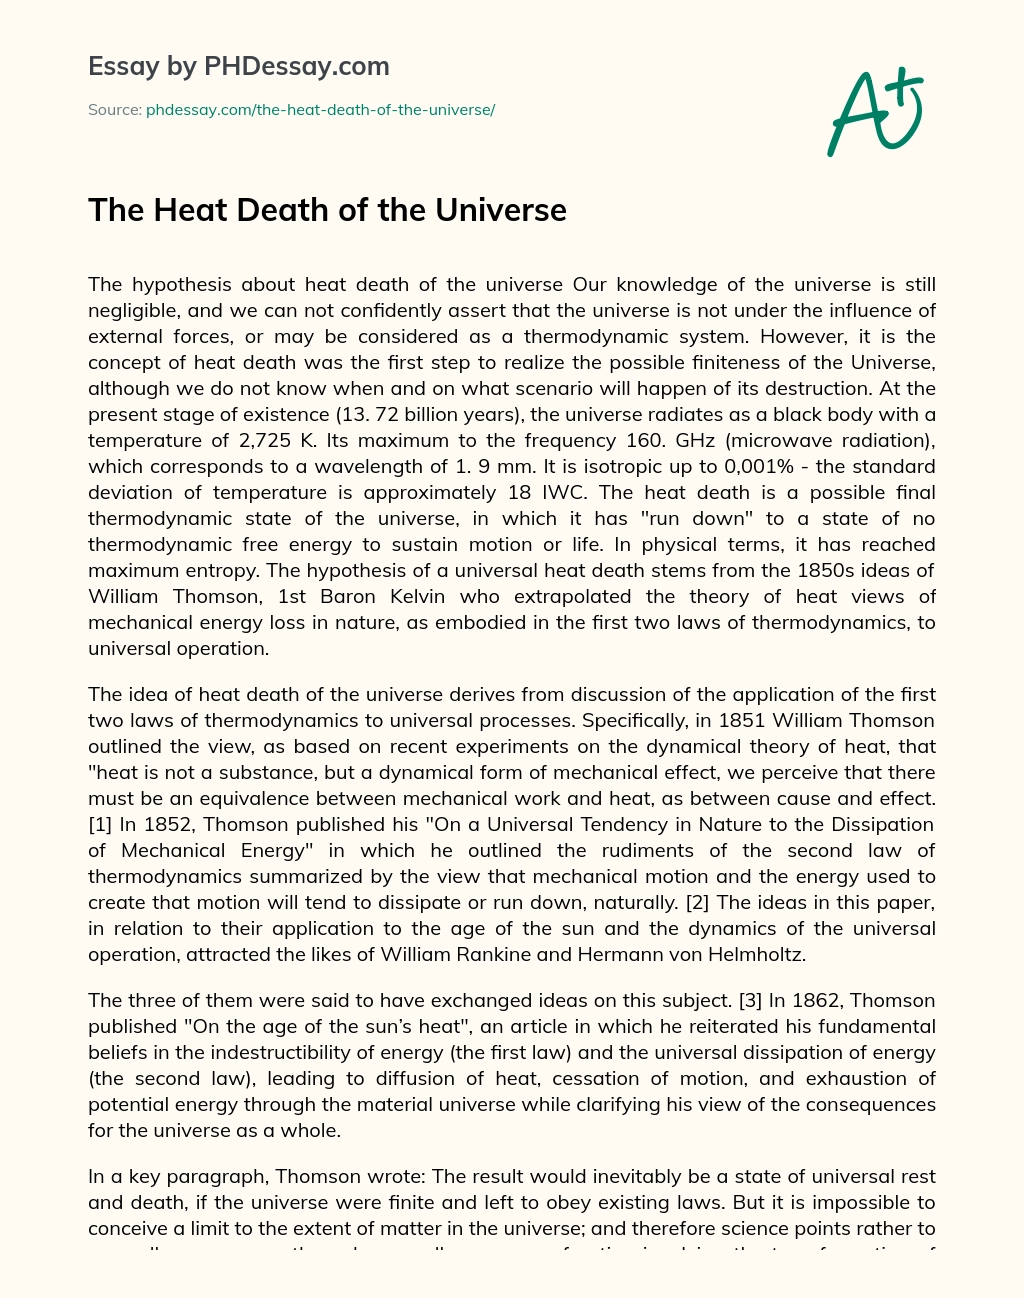 The Heat Death of the Universe essay